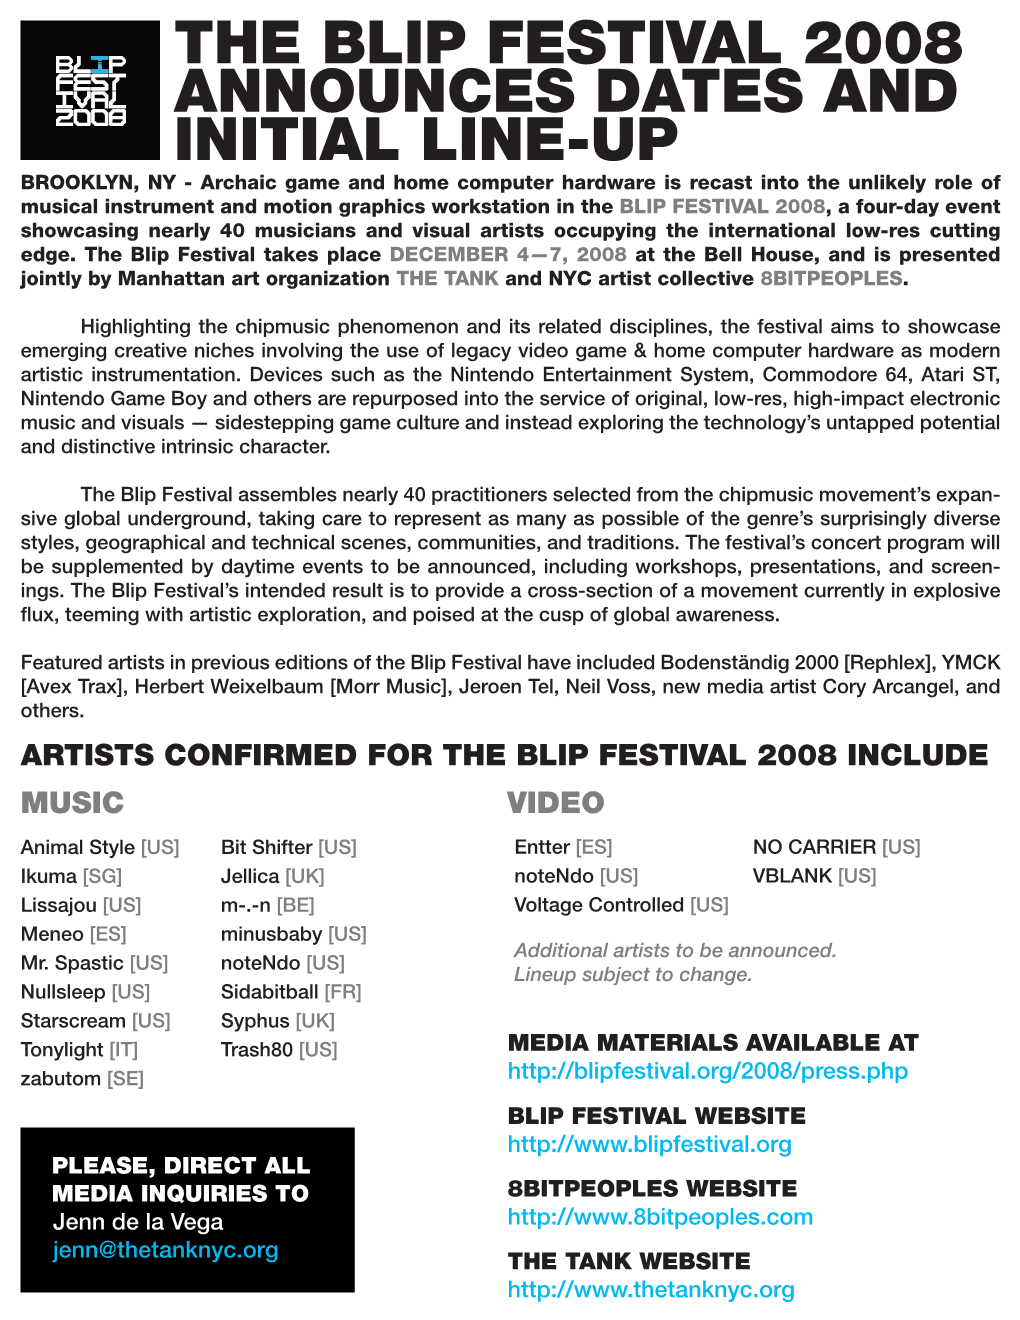 The Blip Festival 2008 Announces Dates and Initial Line